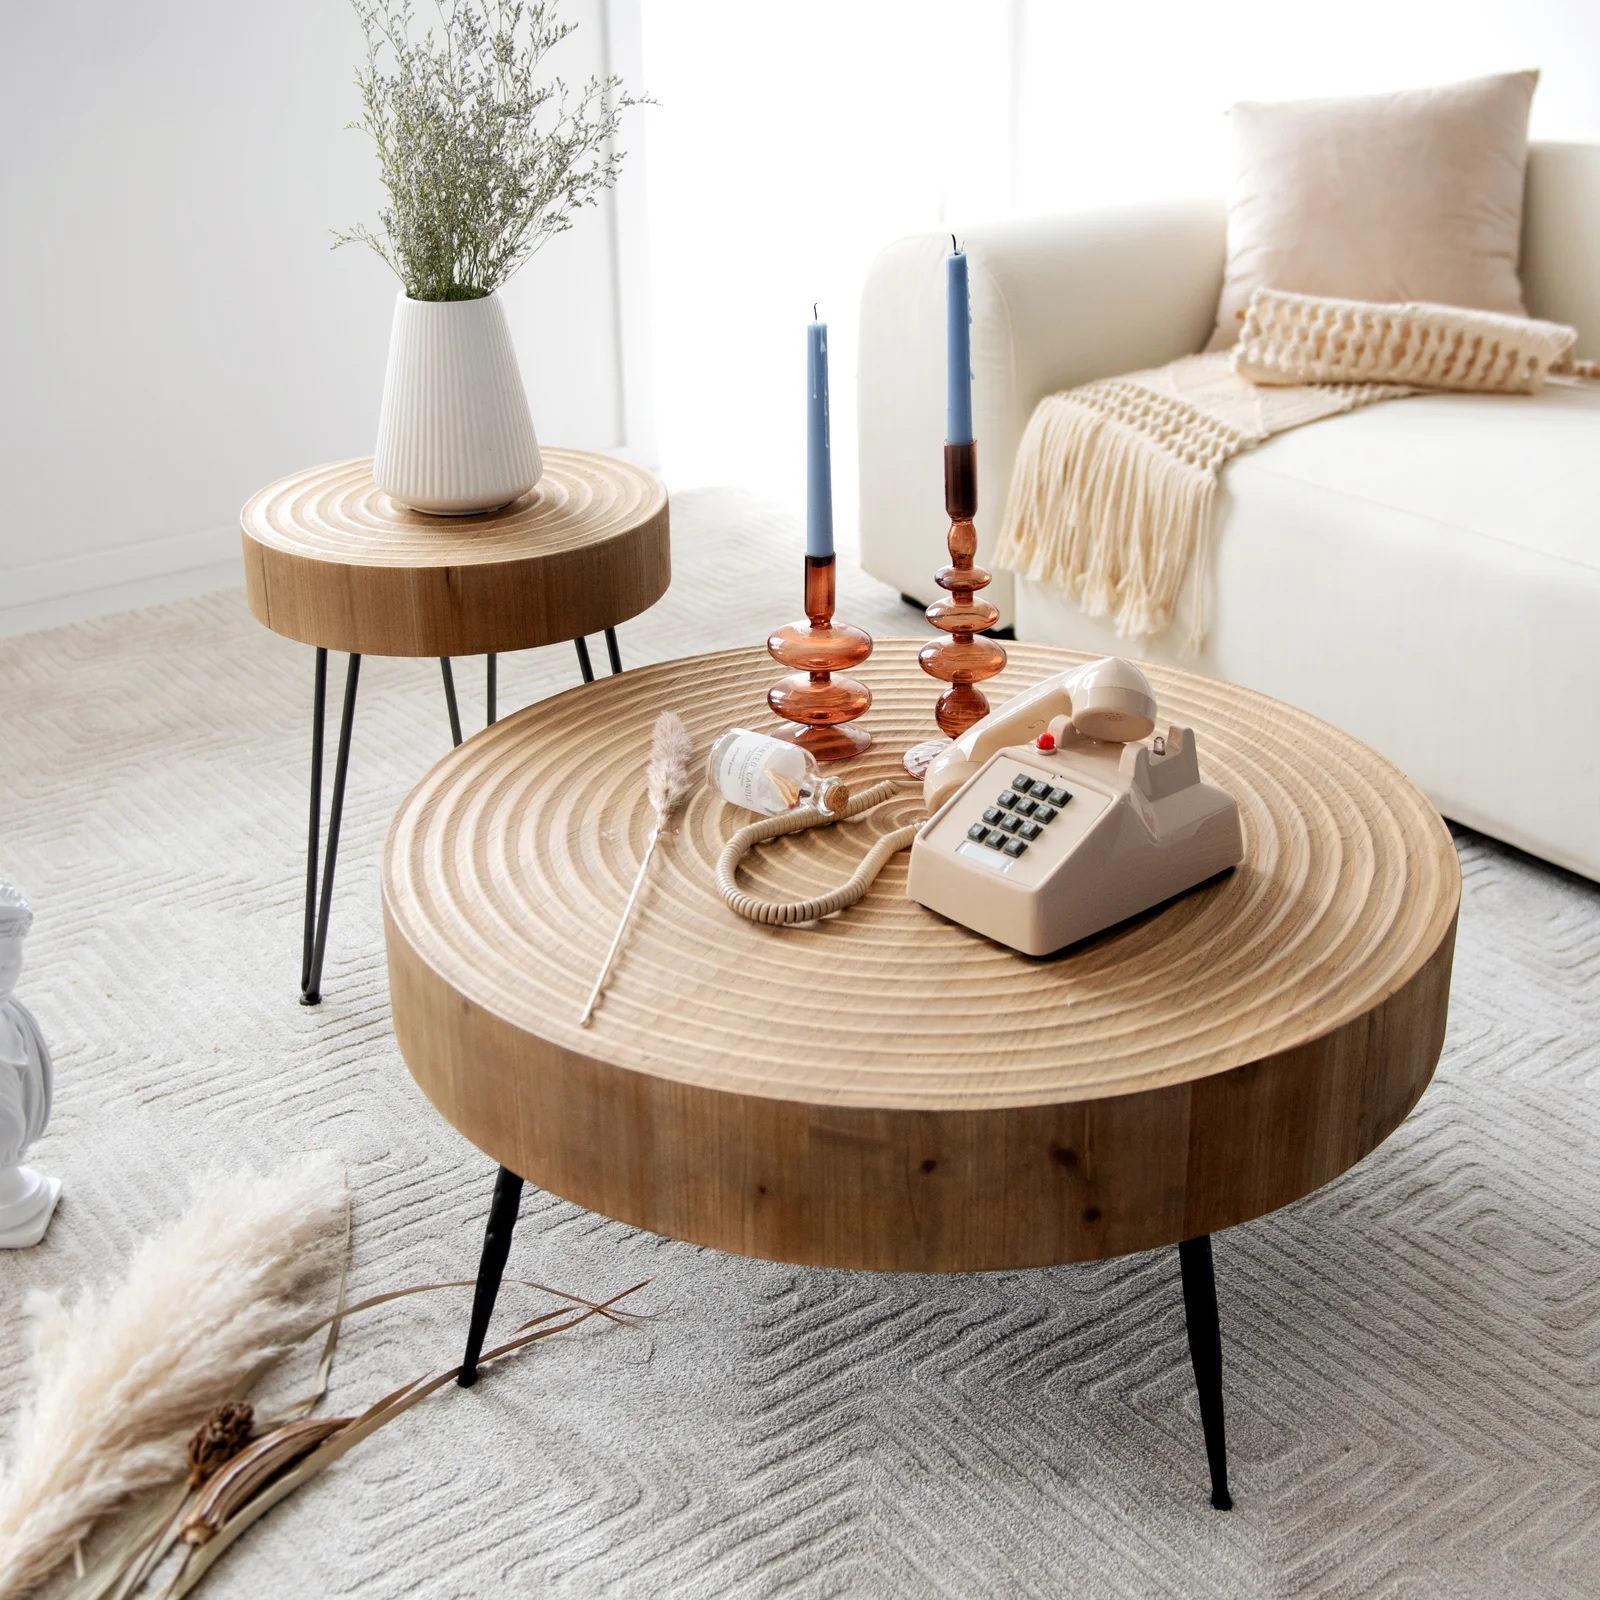 matching coffee table and side table living room furniture set ridged surface creative modern farmhouse living room tables for sale online nesting design round shape hairpin leg